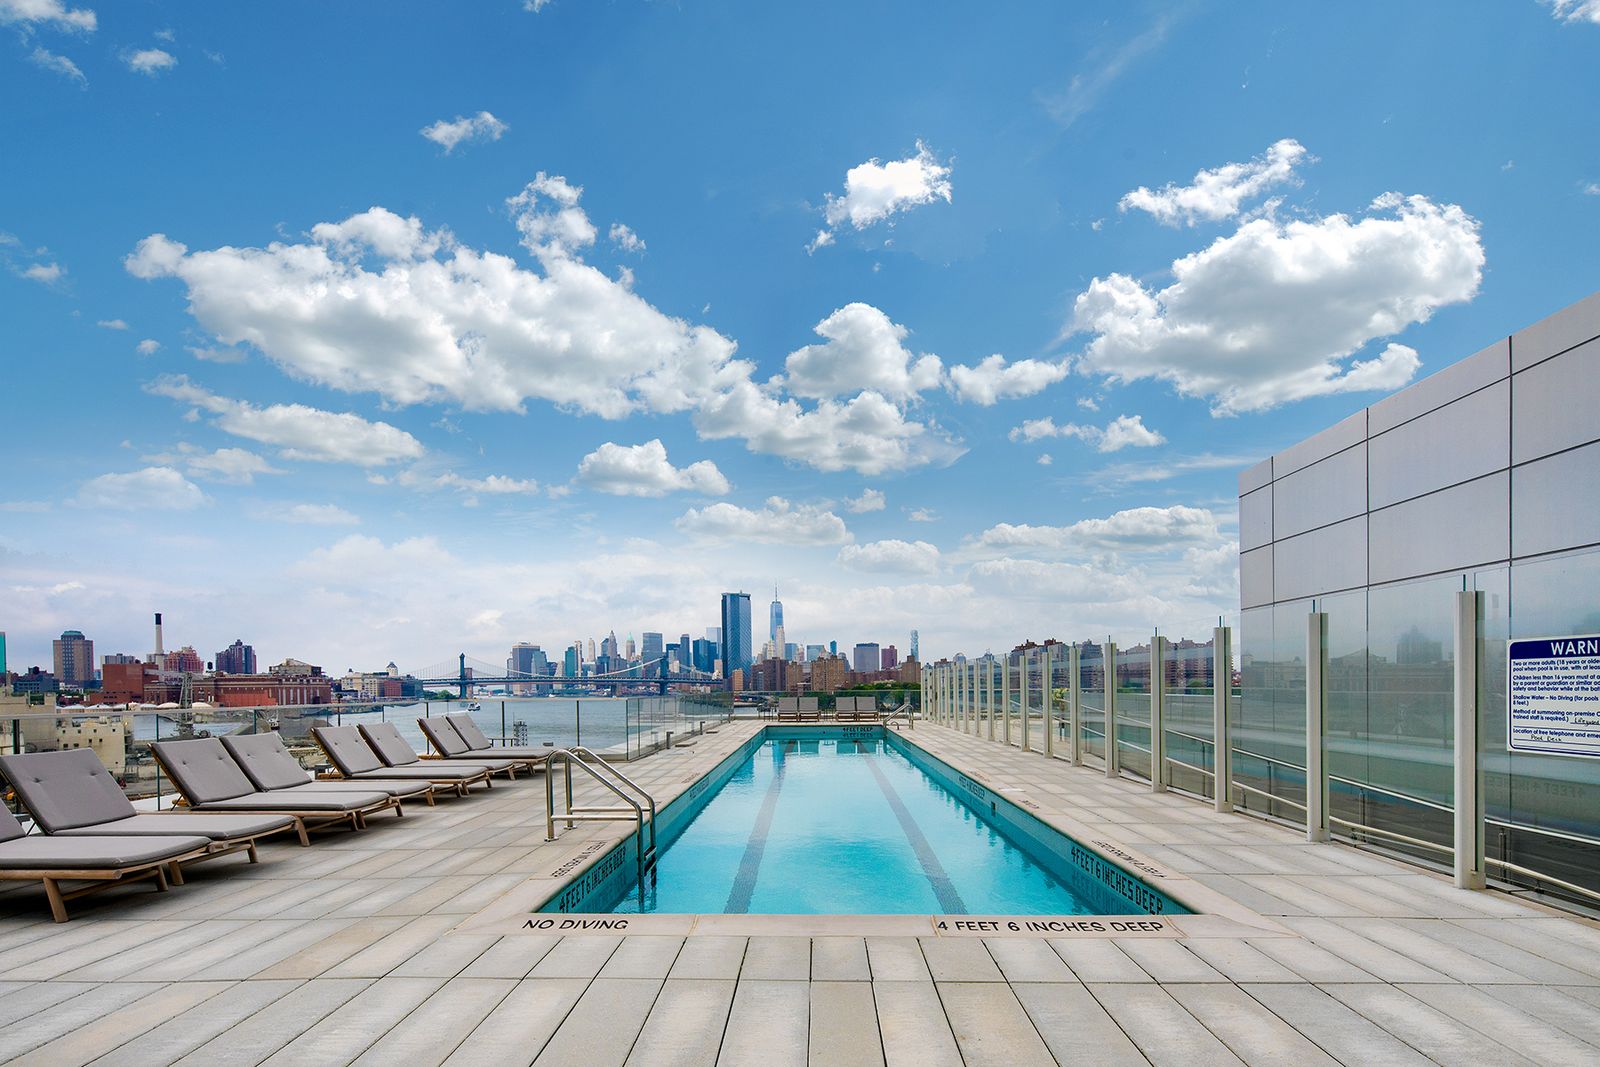 420 Kent Pool with loungers, river and city views